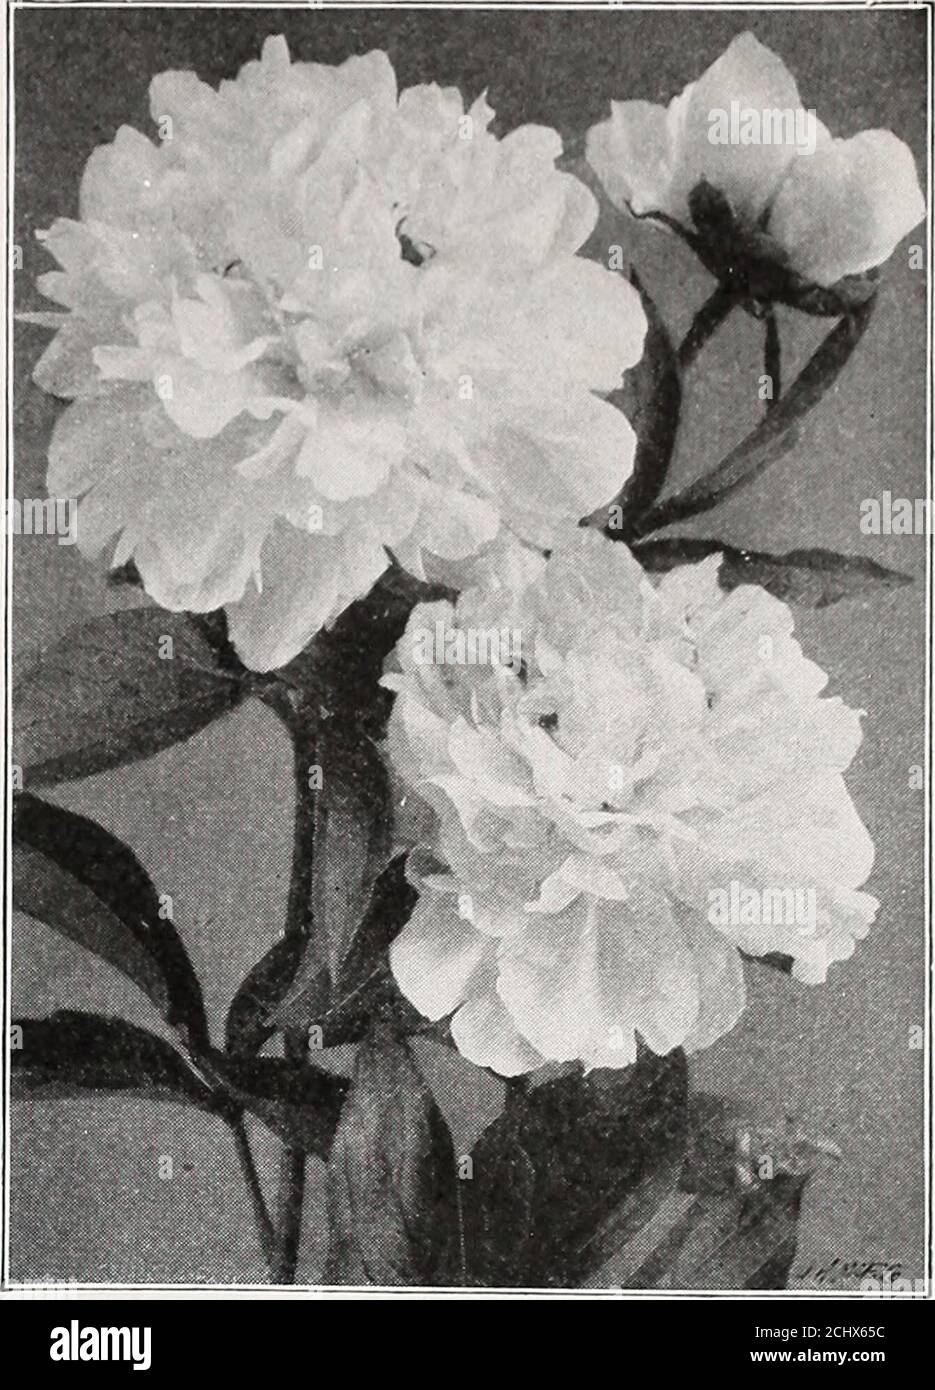 . Beckert's bulb catalogue : fall 1916 . Lily-of-the-Valley Peony, Festiva Maxima OXALIS Valuable for winter flowering; elegant for pots and baskets. 6 to10 bulbs may be planted in a pot. All prices postpaidBermuda Buttercup. Very good for winter- Each Doz. wo flowering, being free and continuous; pure bright yellow flowers $0 02 $0 20 $1 50 Bowiei. Brilliant carmine-rose 02 20 1 50 Grand Duchess. Dwarf variety of great beauty. Flowers large and thrown well above thefoiiage. Lavender, Pink and White 02 20 1 50 Mixed Varieties 10 50 PEONIES NOVEMBER One of the most durable and satisfactory gard Stock Photo